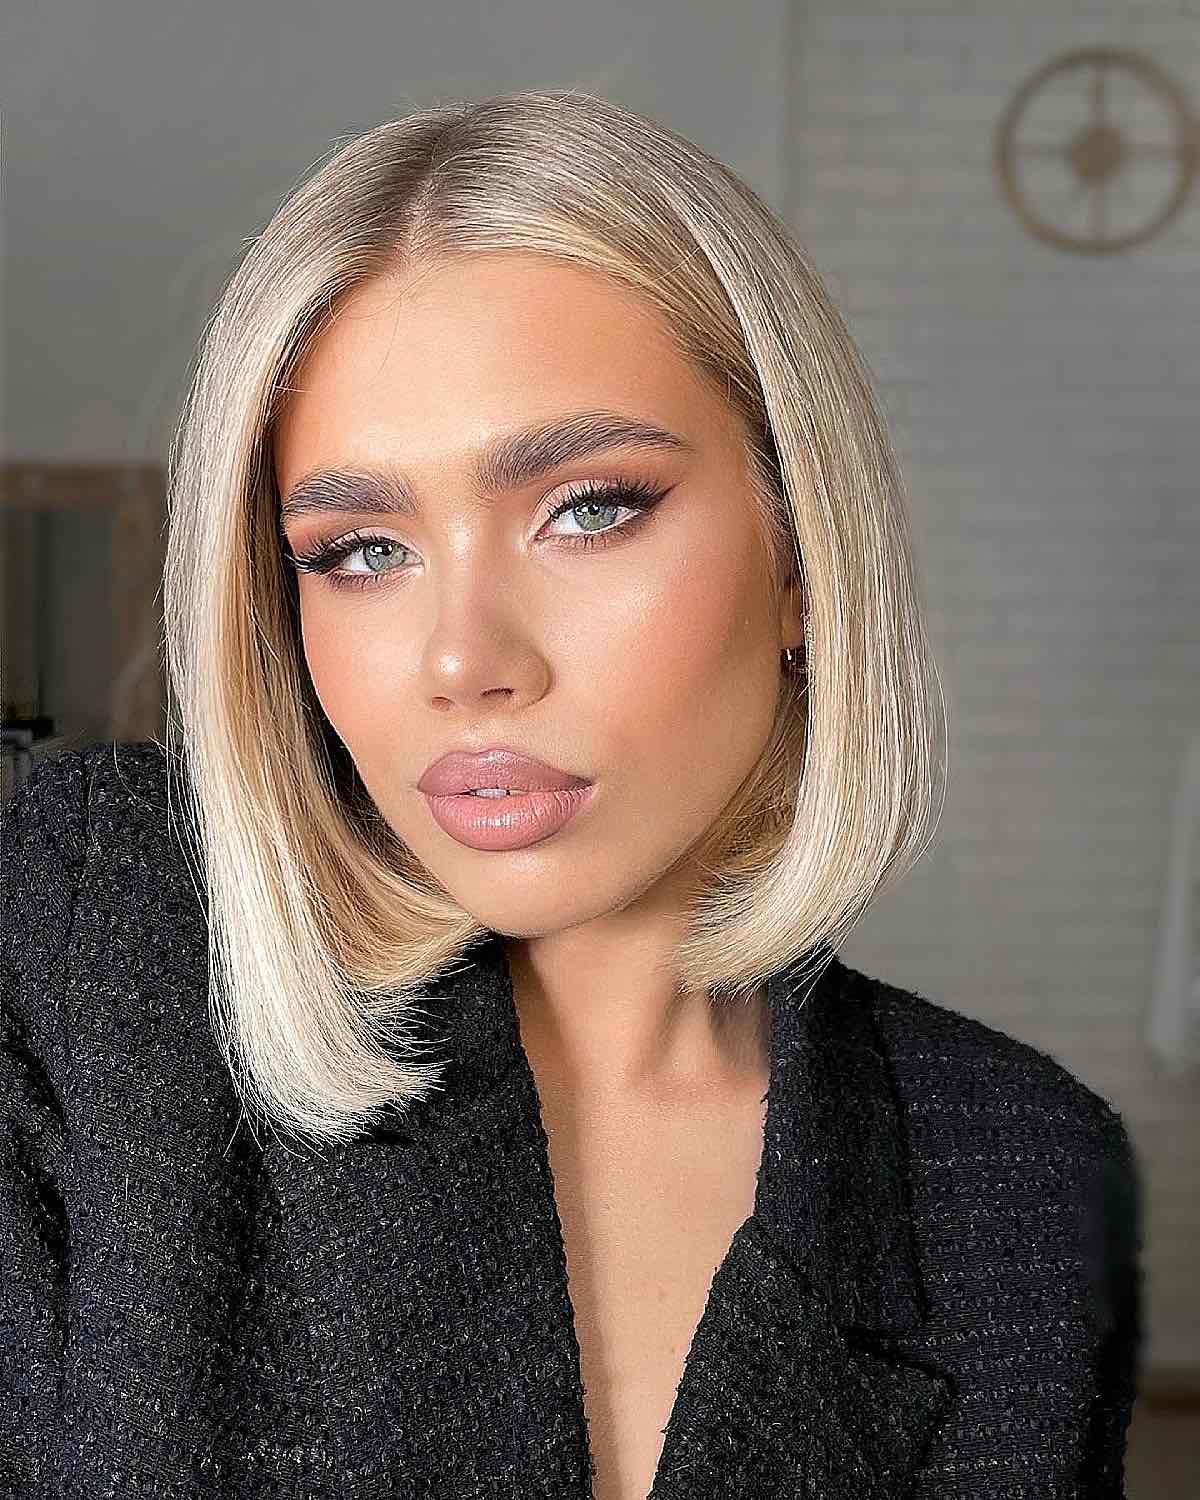 39 Straight Bob Haircut Ideas For A Simple & Chic Look Intended For Most Current Straight Angled Bob Haircuts (View 10 of 25)